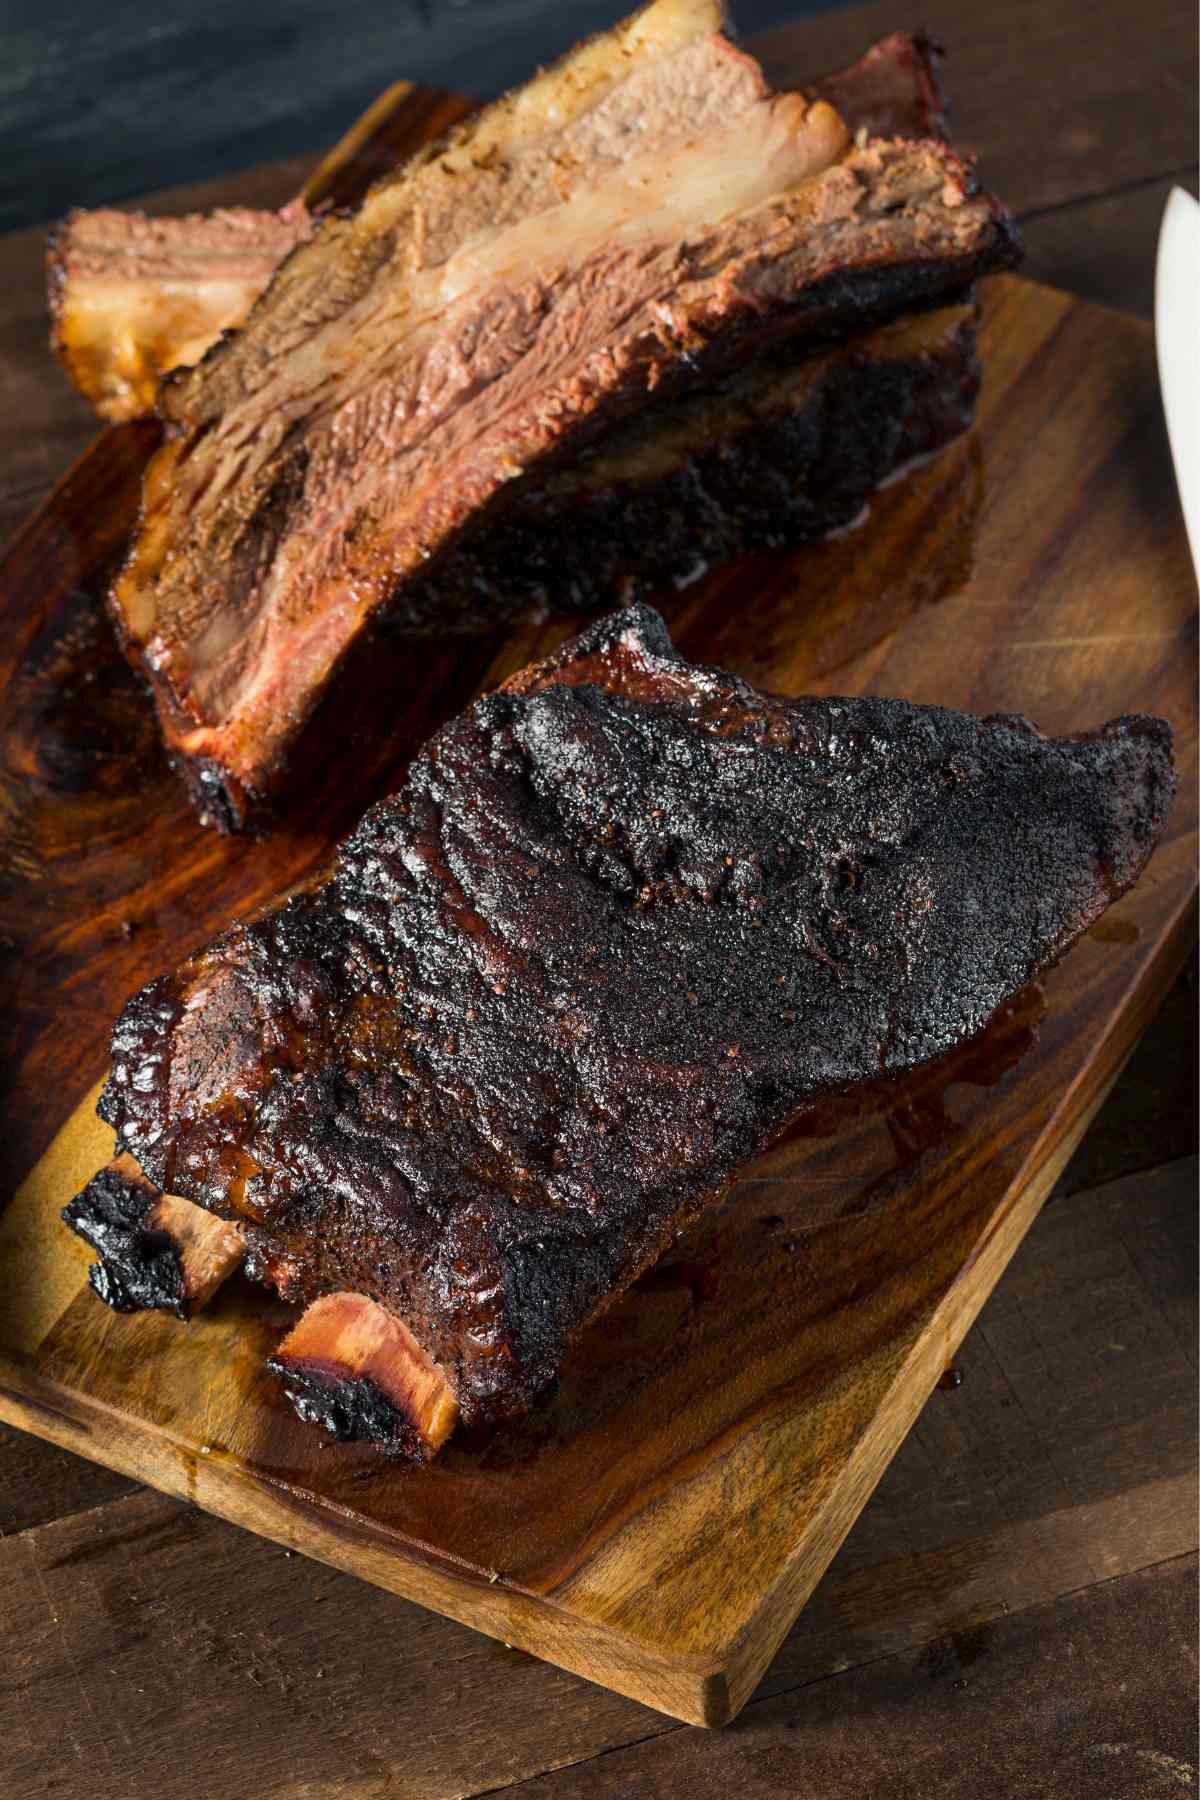 Not sure what’s the best temperature to smoke your ribs? Or what is the right internal temperature for smoked ribs? You’ve come to the right place. We’ll answer these questions, and in addition, we’ll cover how long to smoke ribs and tips for perfectly smoked ribs.